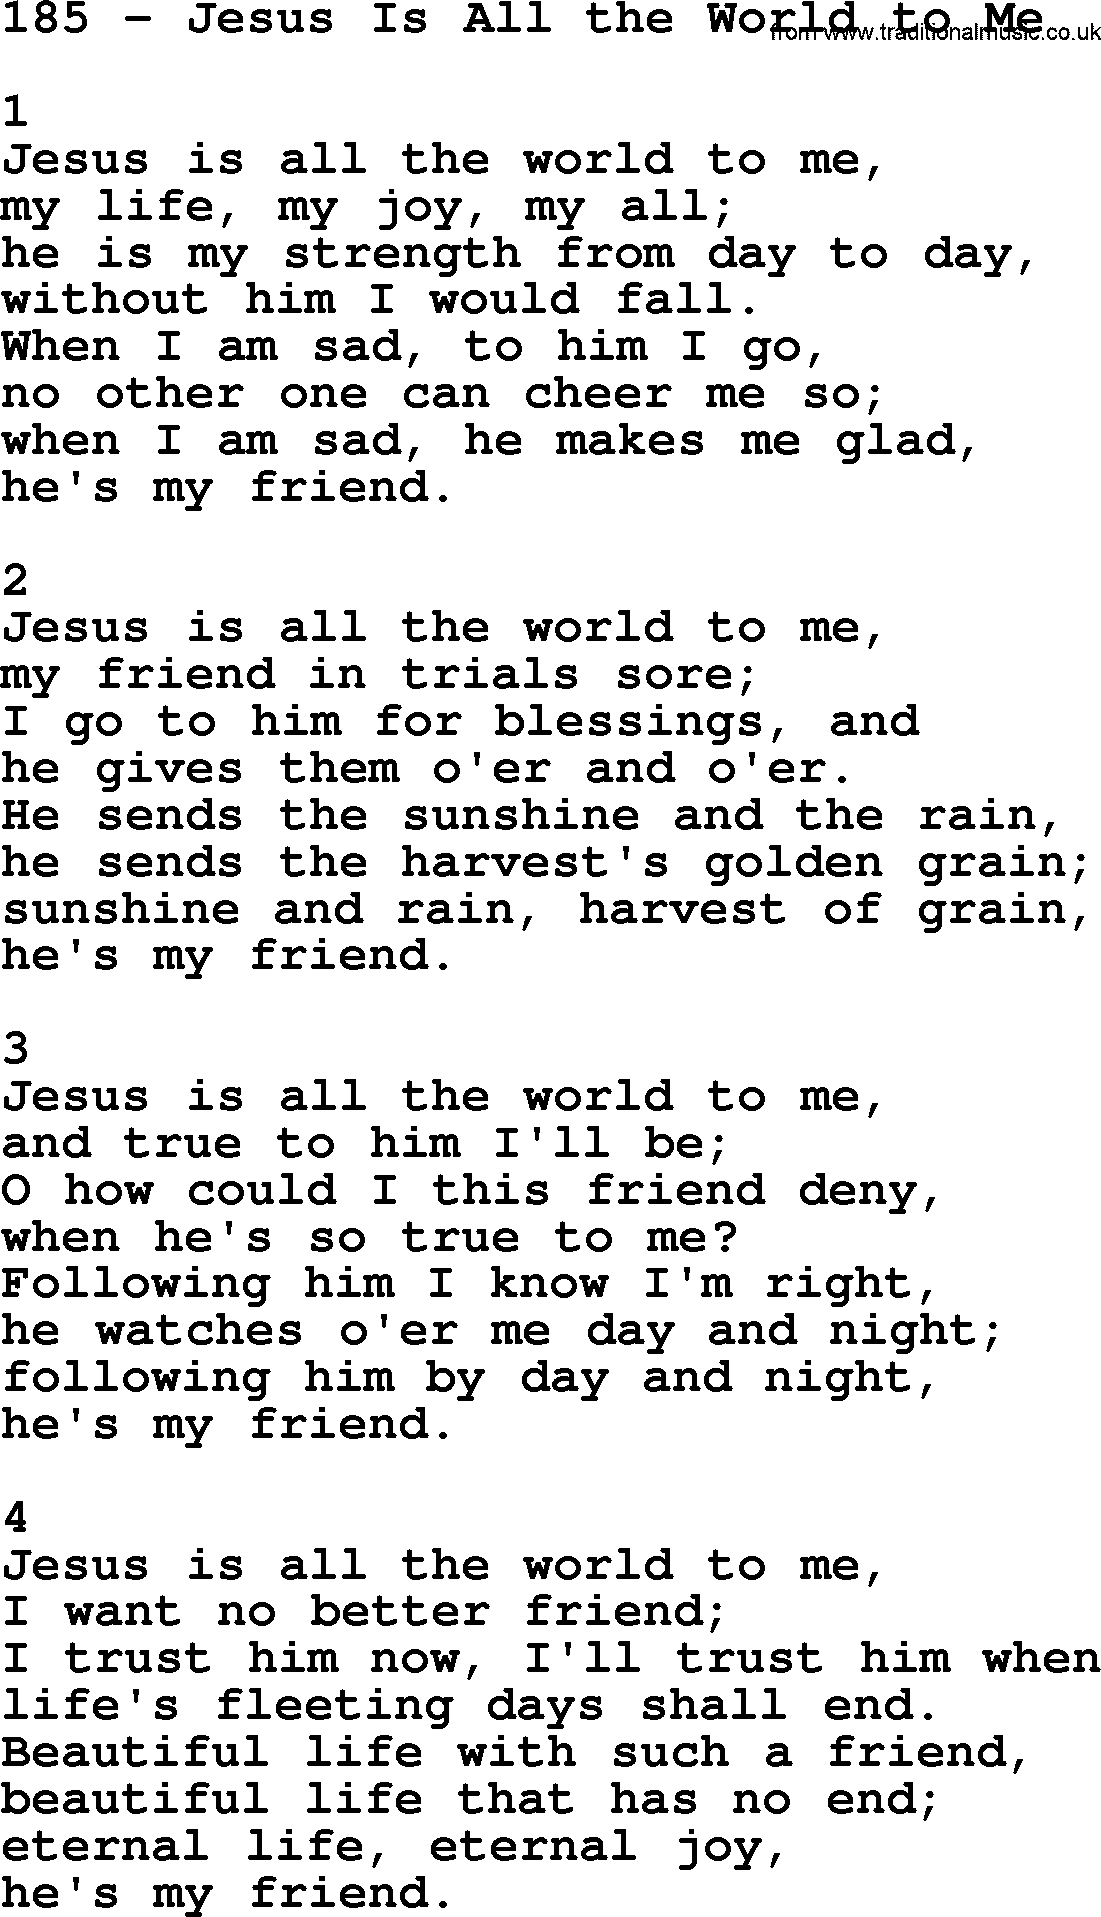 Complete Adventis Hymnal, title: 185-Jesus Is All The World To Me, with lyrics, midi, mp3, powerpoints(PPT) and PDF,